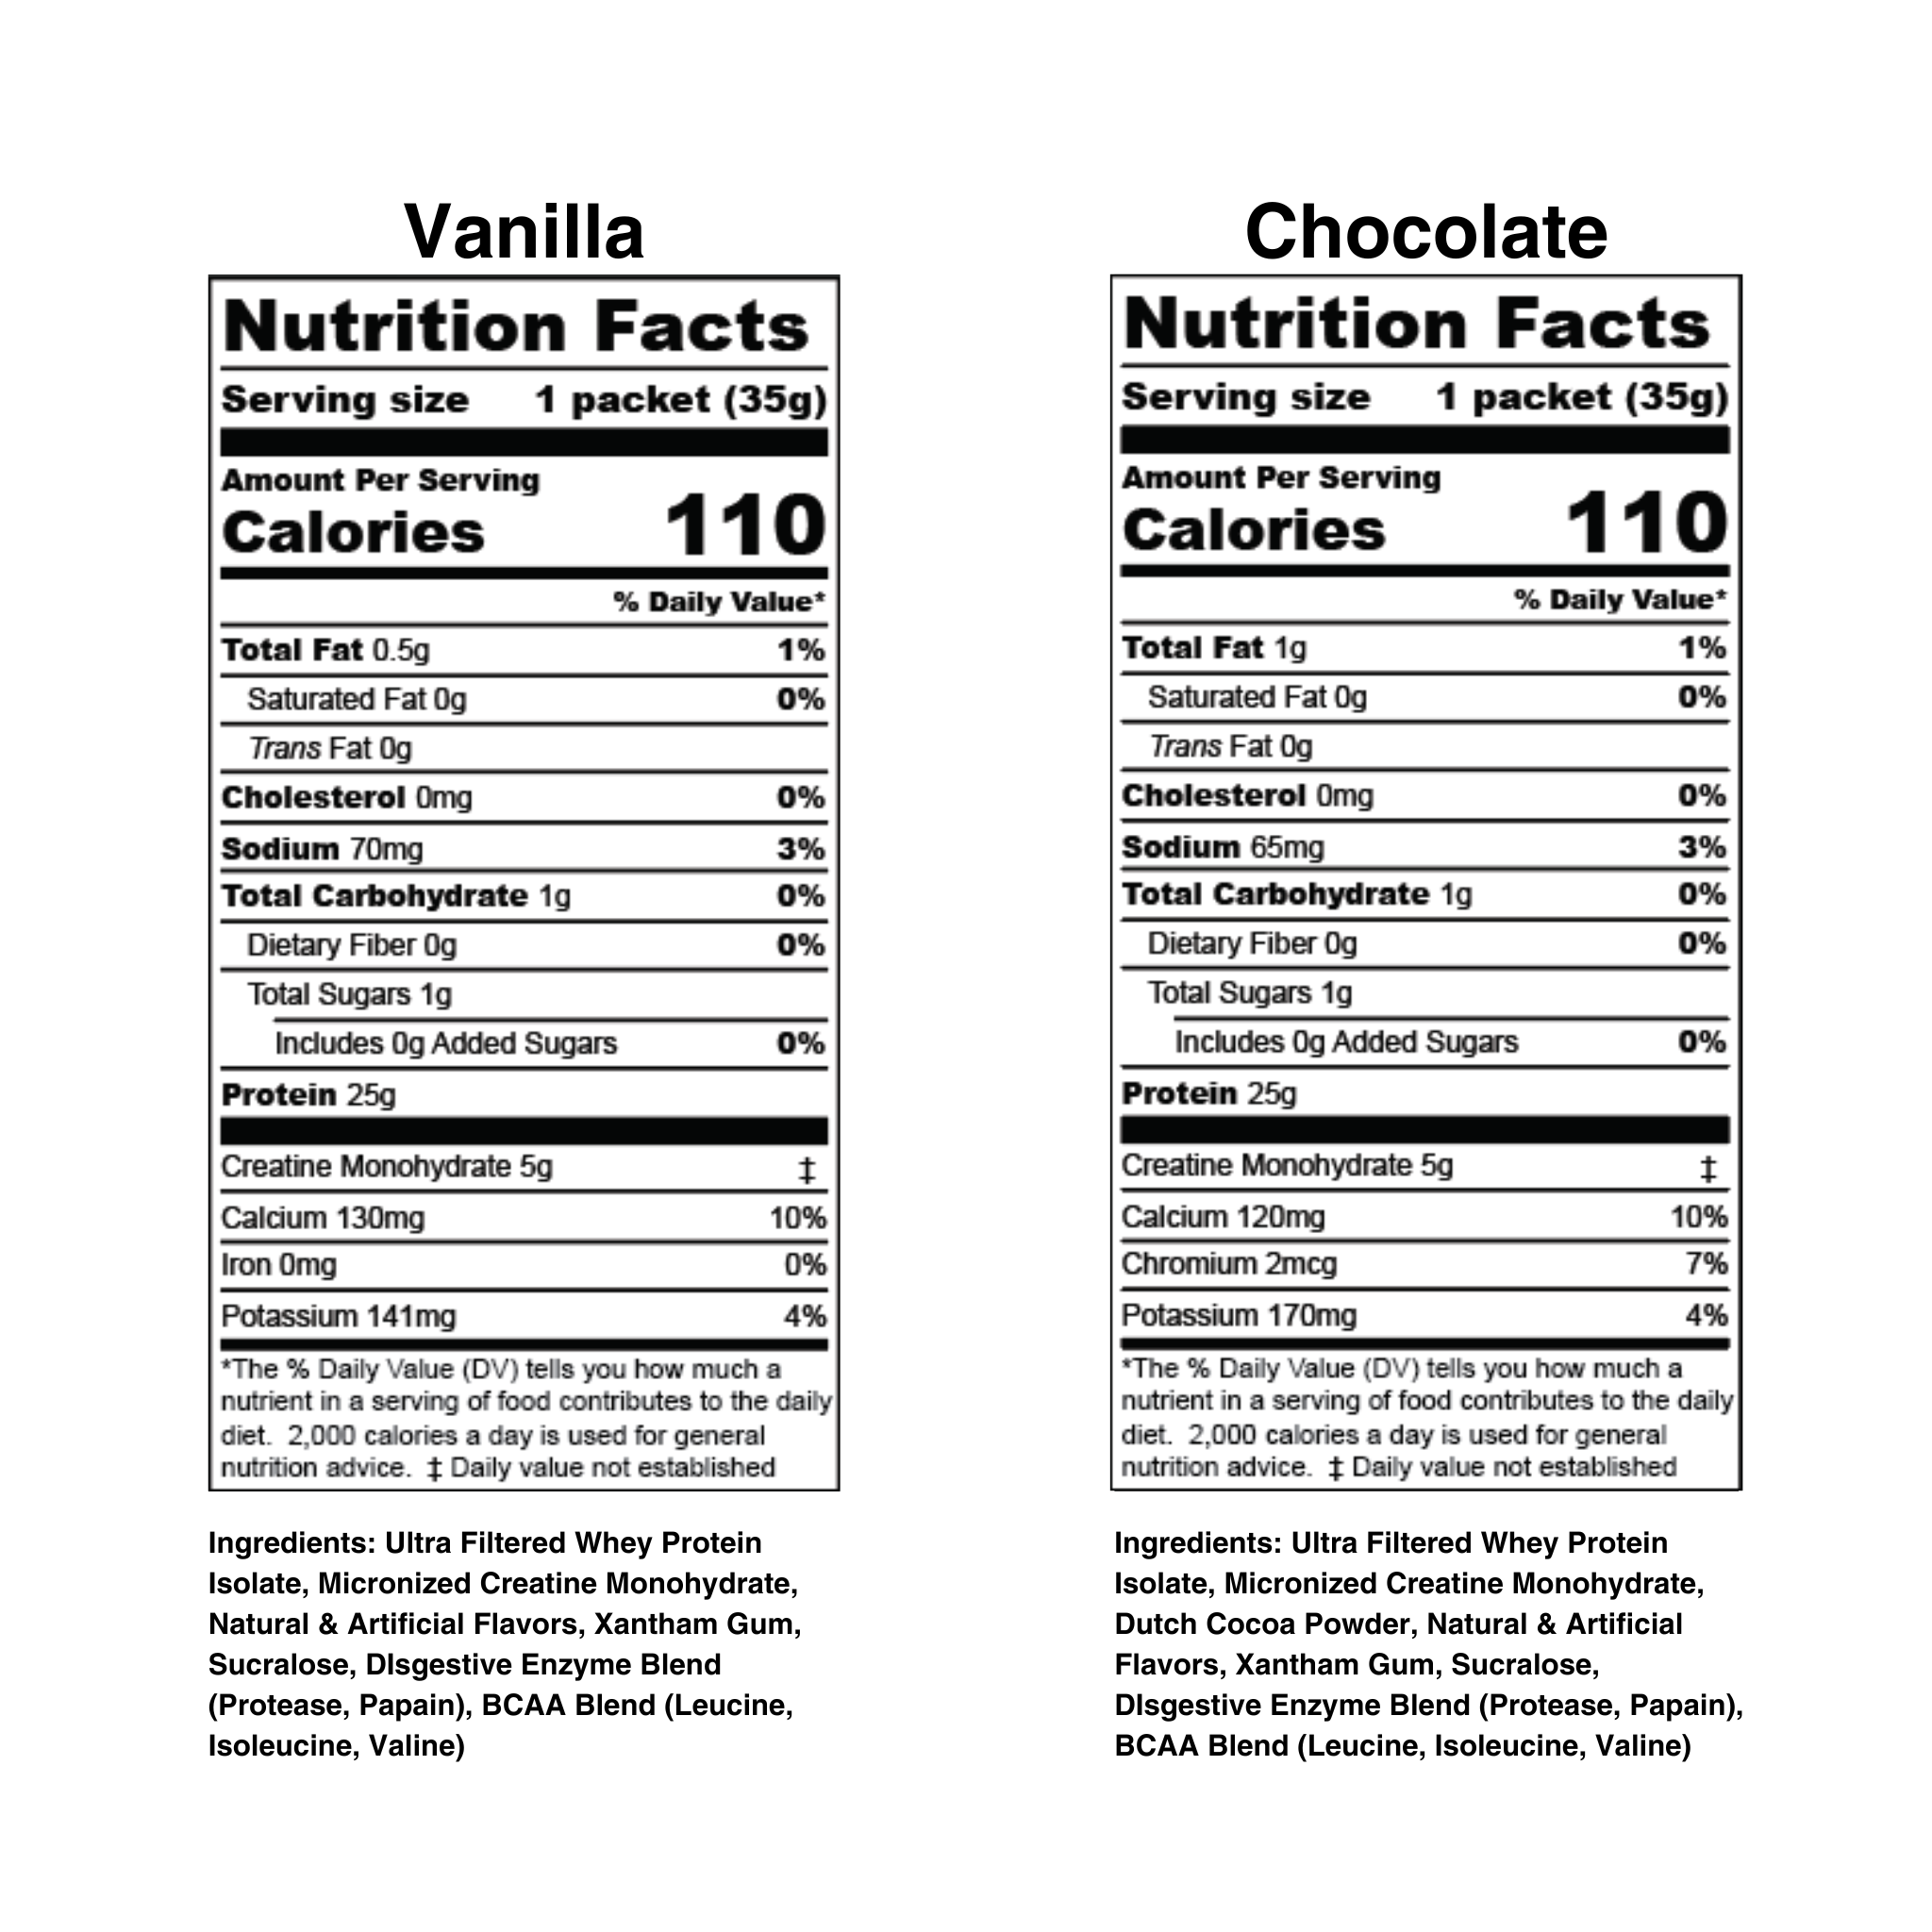 Two nutrition facts labels for a 35g serving of protein powder.